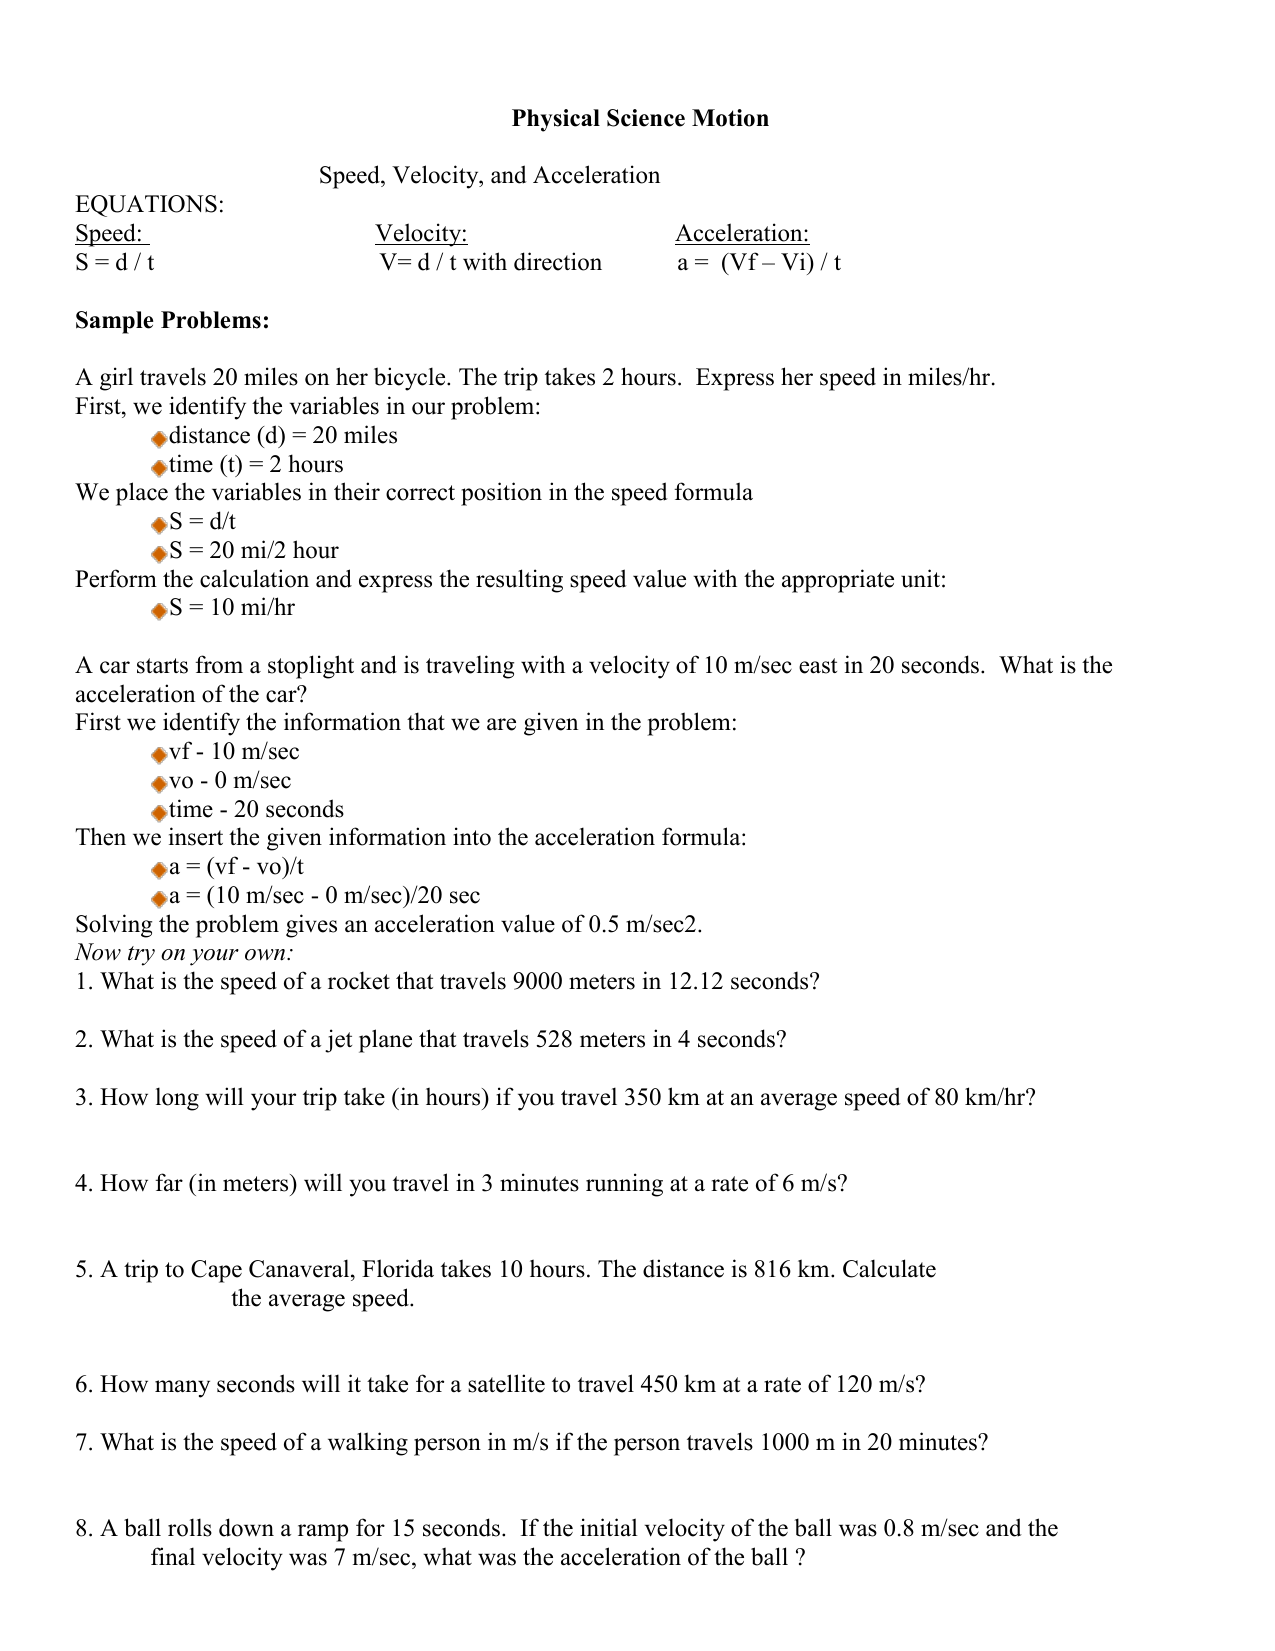 speed velocity acceleration test practice For Velocity And Acceleration Calculation Worksheet